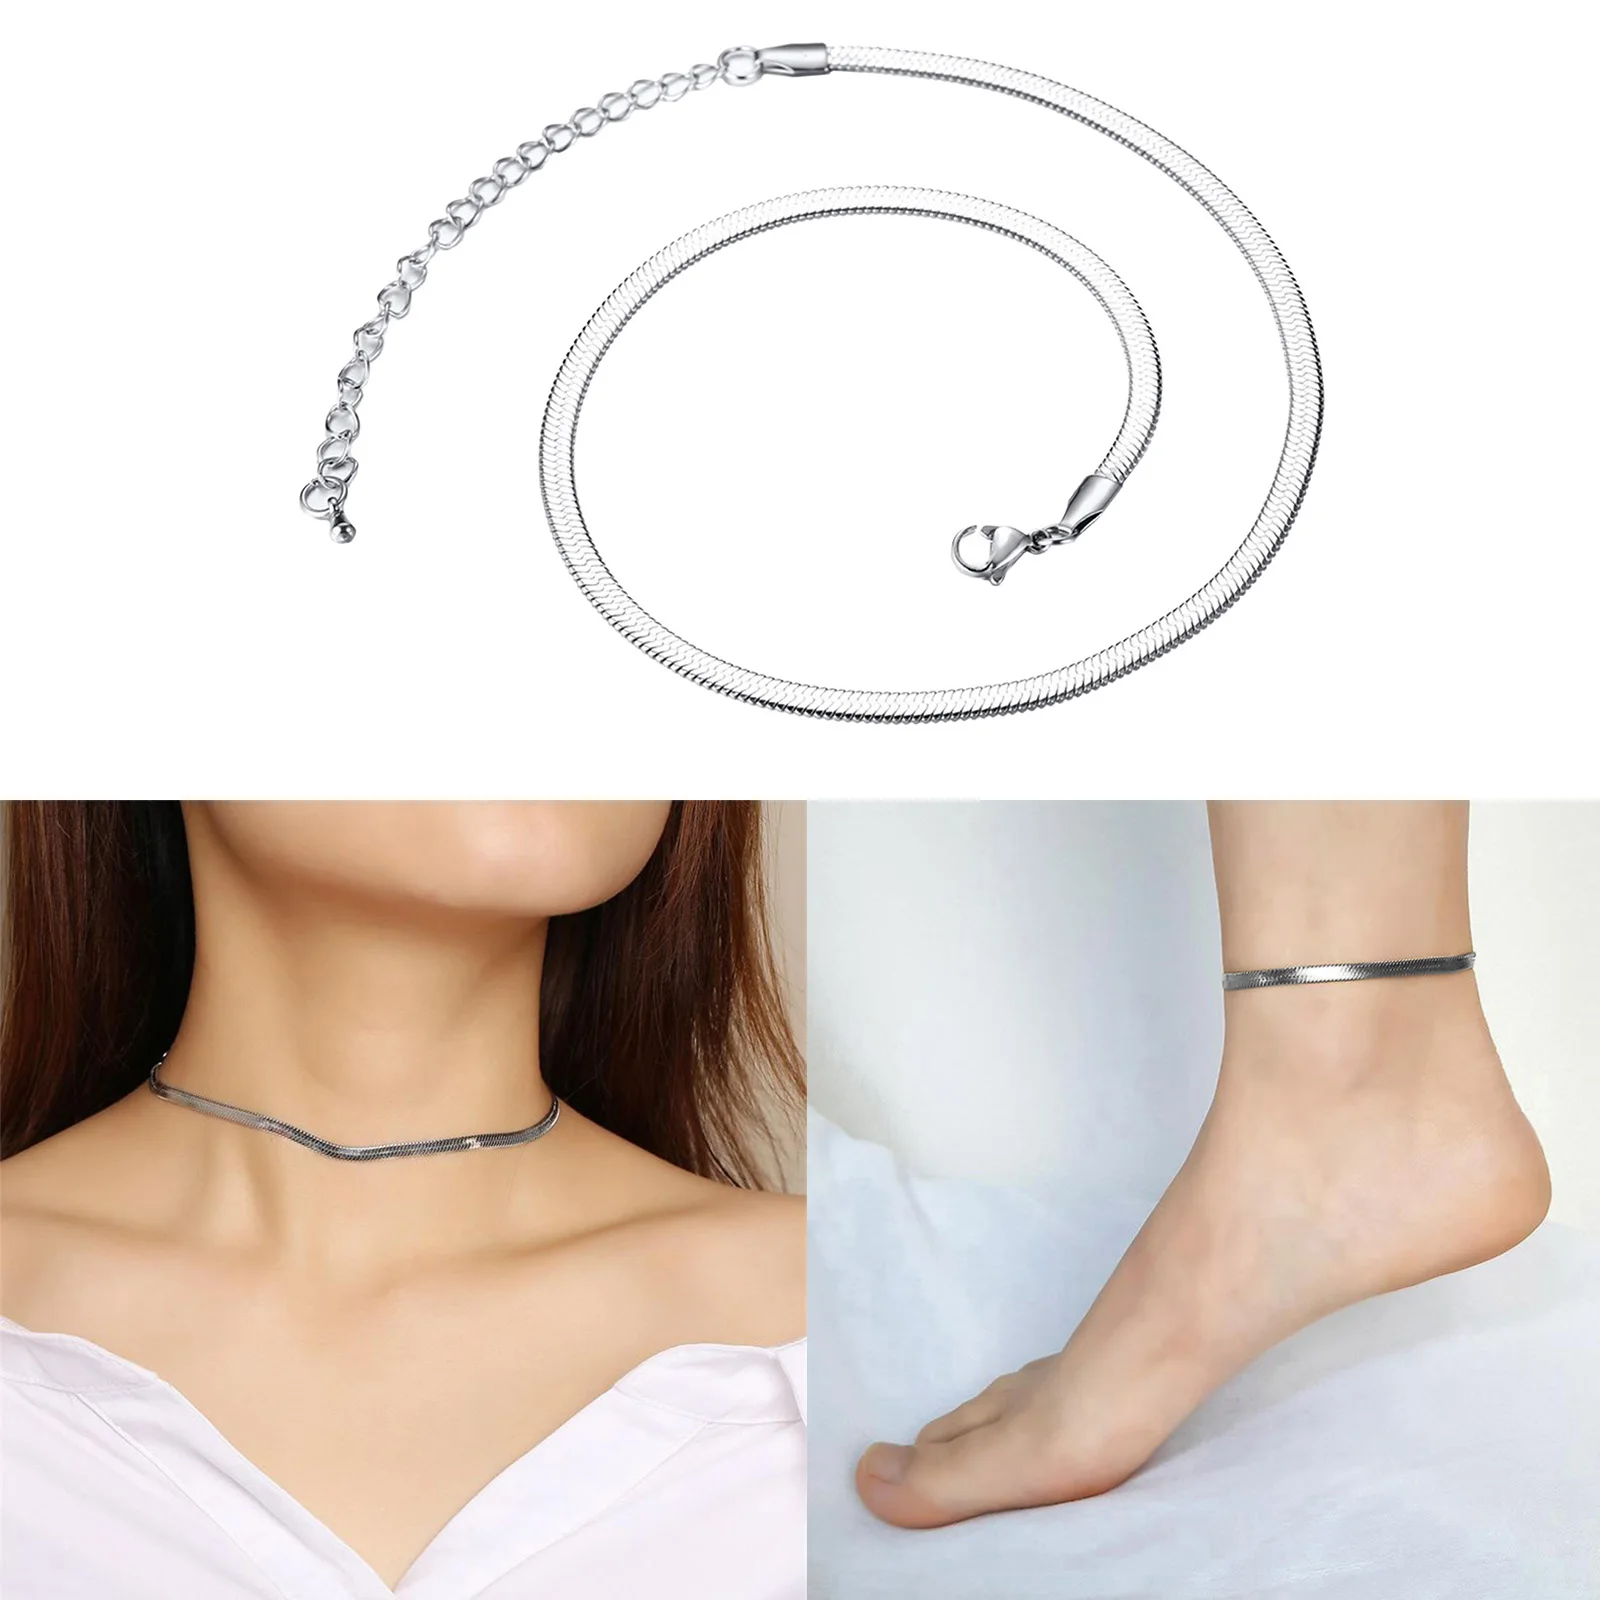 Stainless Steel 4mm Classic Hip Hop Chain Choker Necklace Link Jewelry New